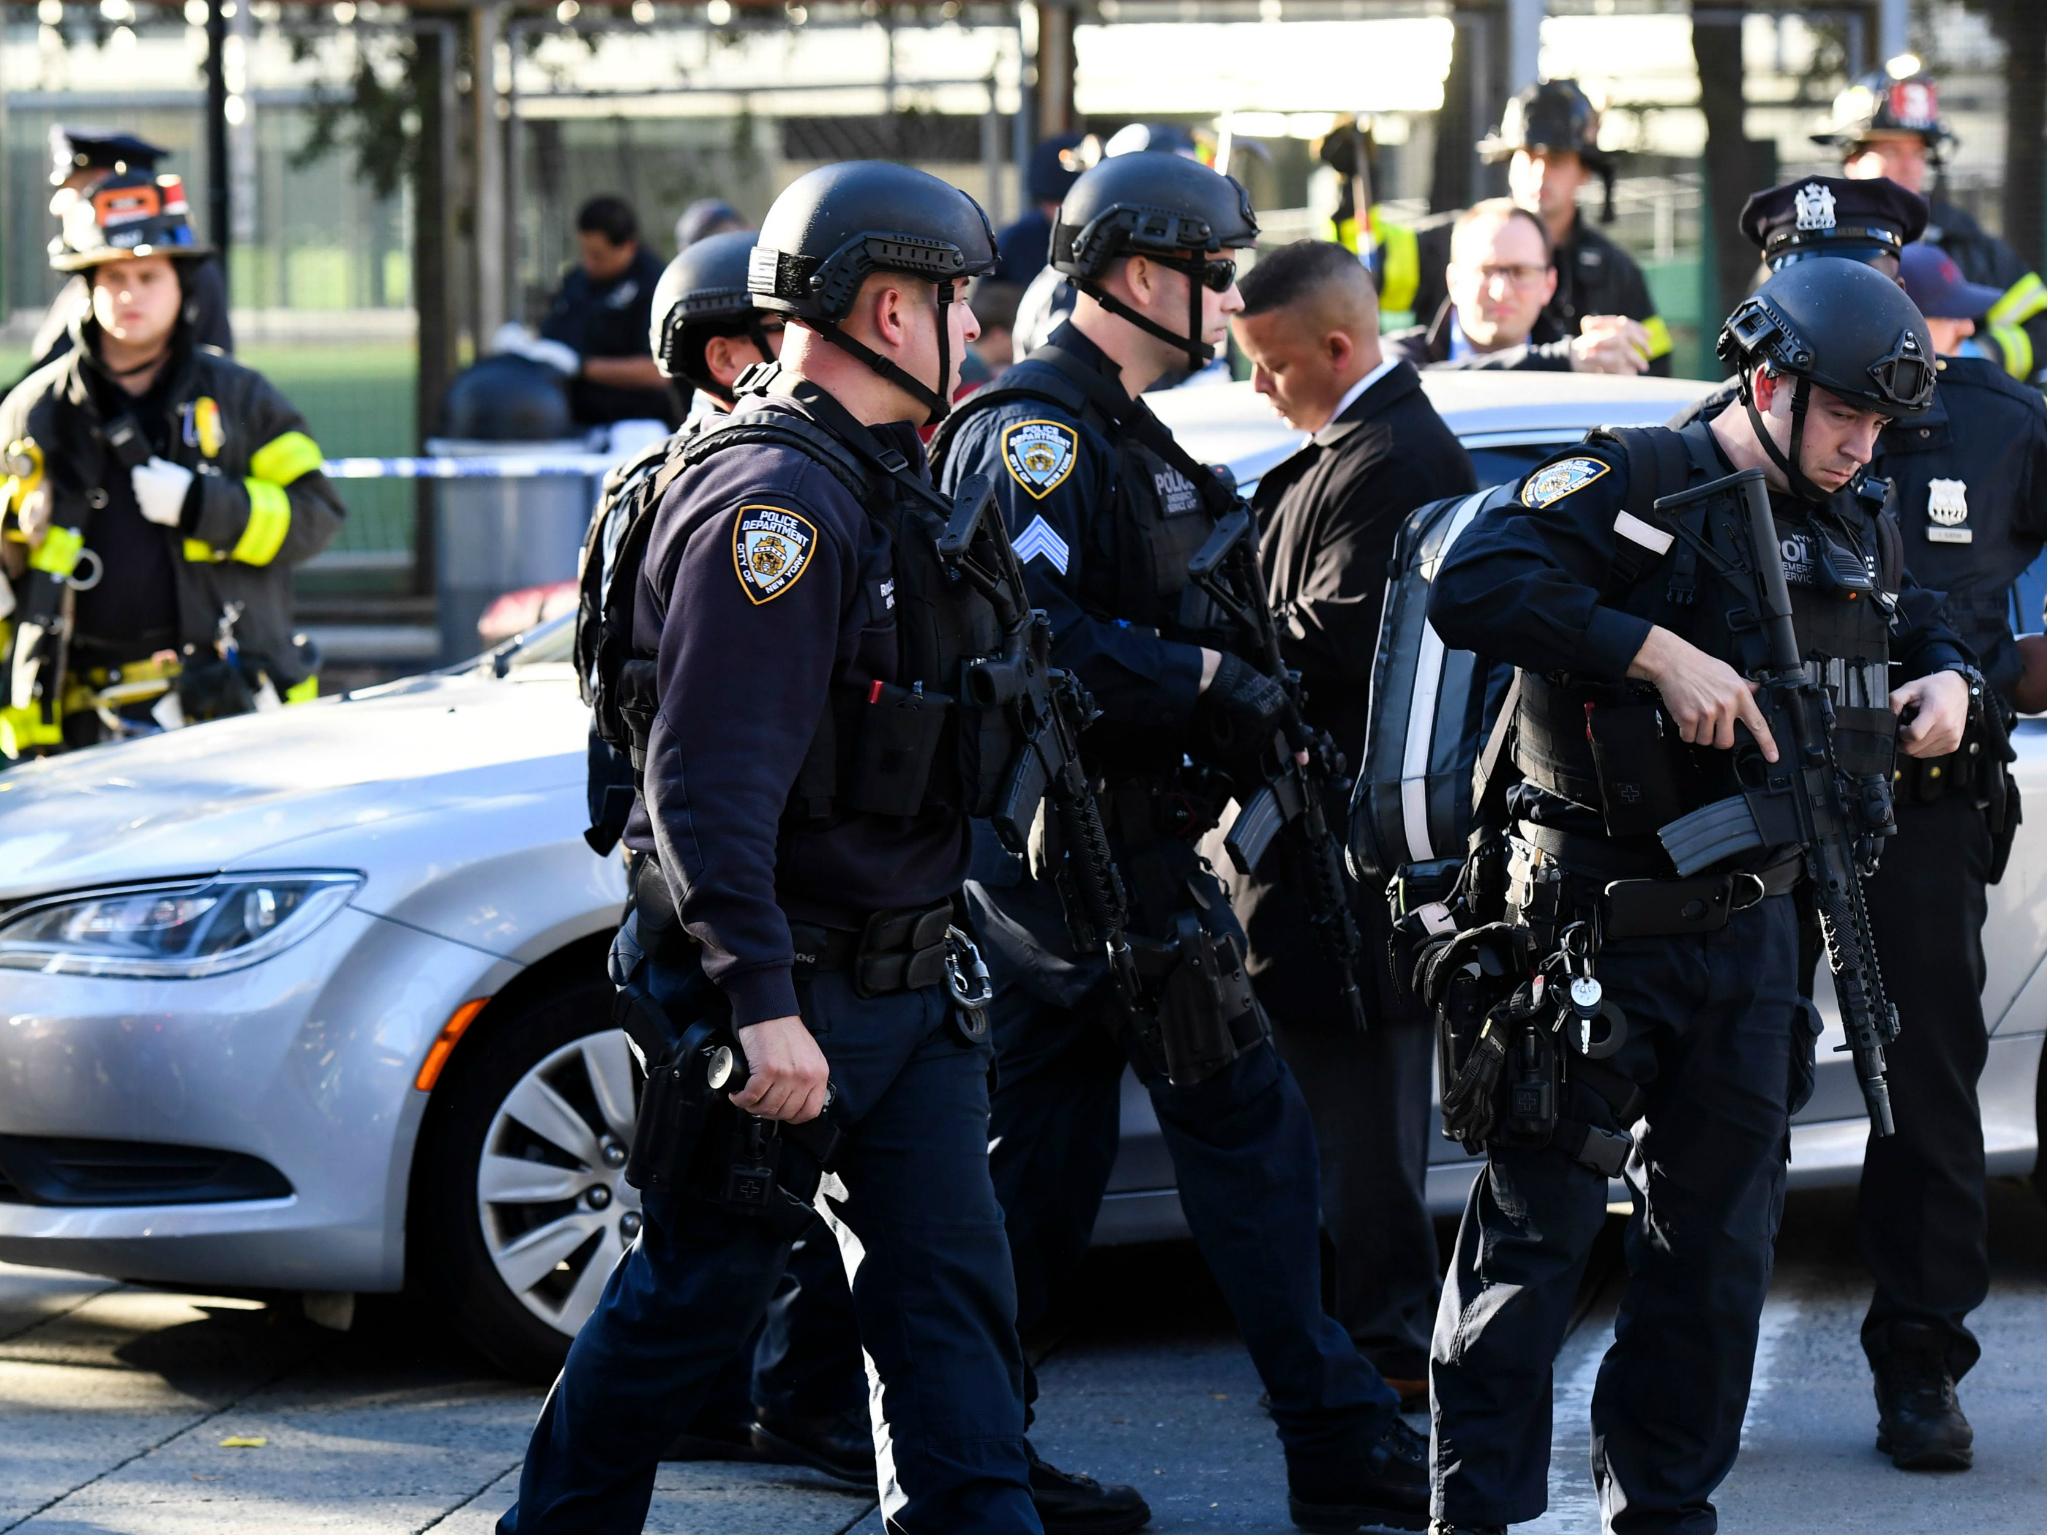 Police officers arrive at the scene following the truck attack in New York